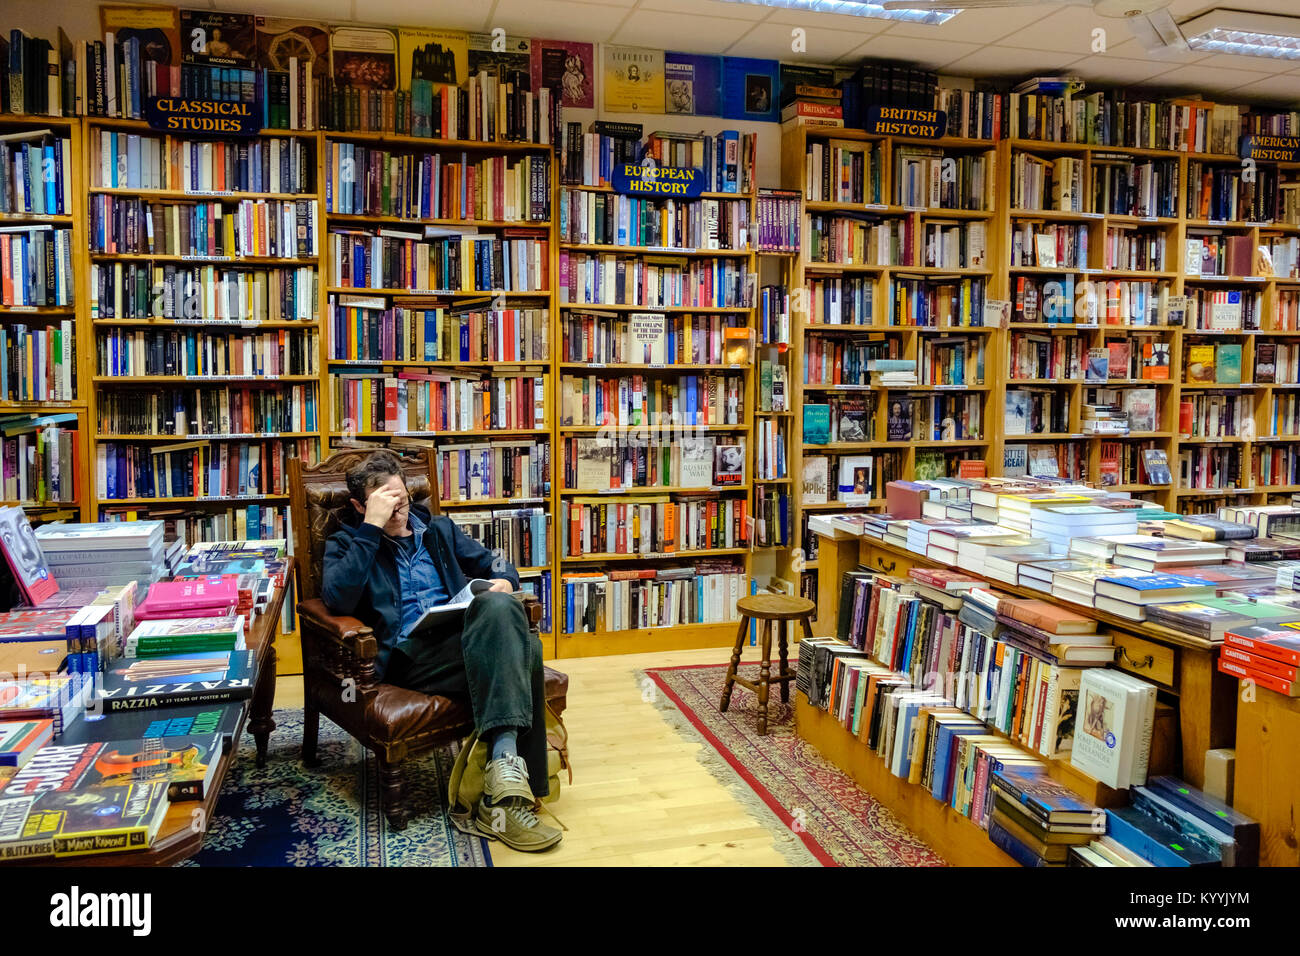 Bookshop interior - Man reading a book inside Charlie Byrne's Bookshop in Galway, Ireland Stock Photo